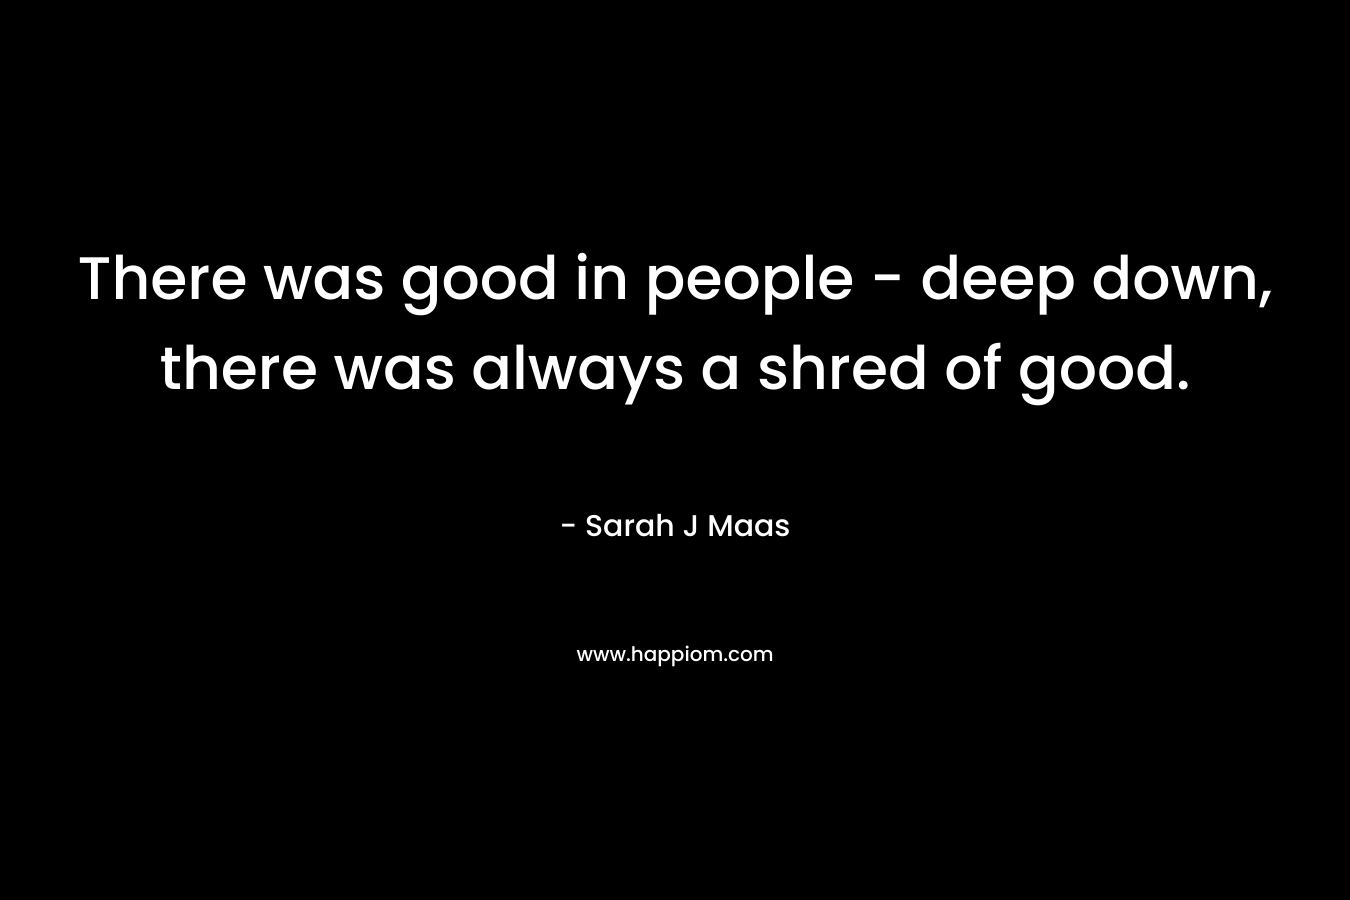 There was good in people - deep down, there was always a shred of good.